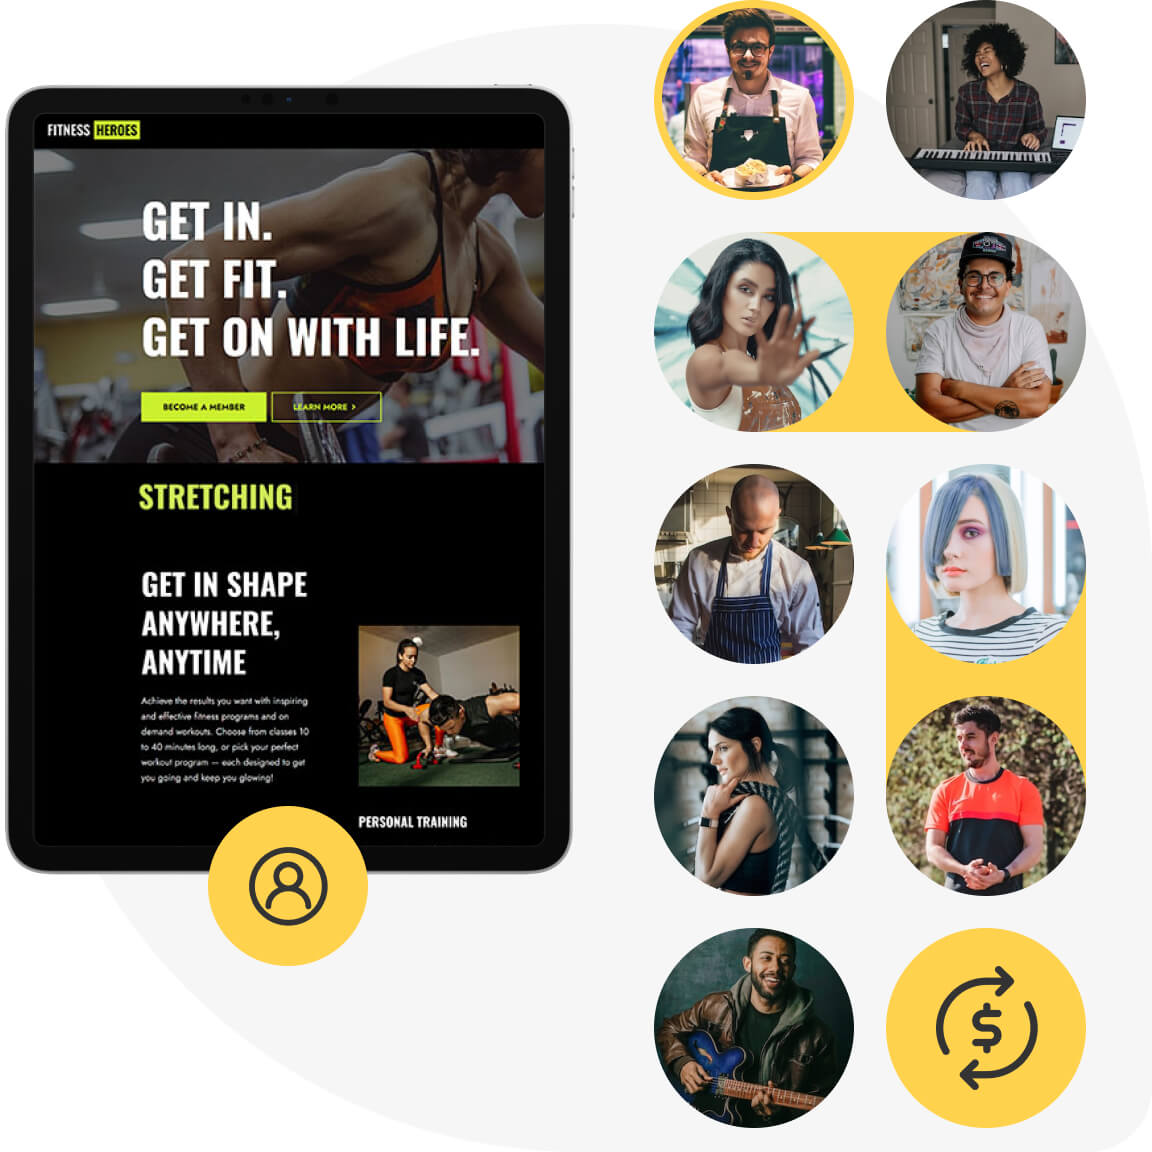 Building a website for a fitness community. An examples from creators in the fitness industry.